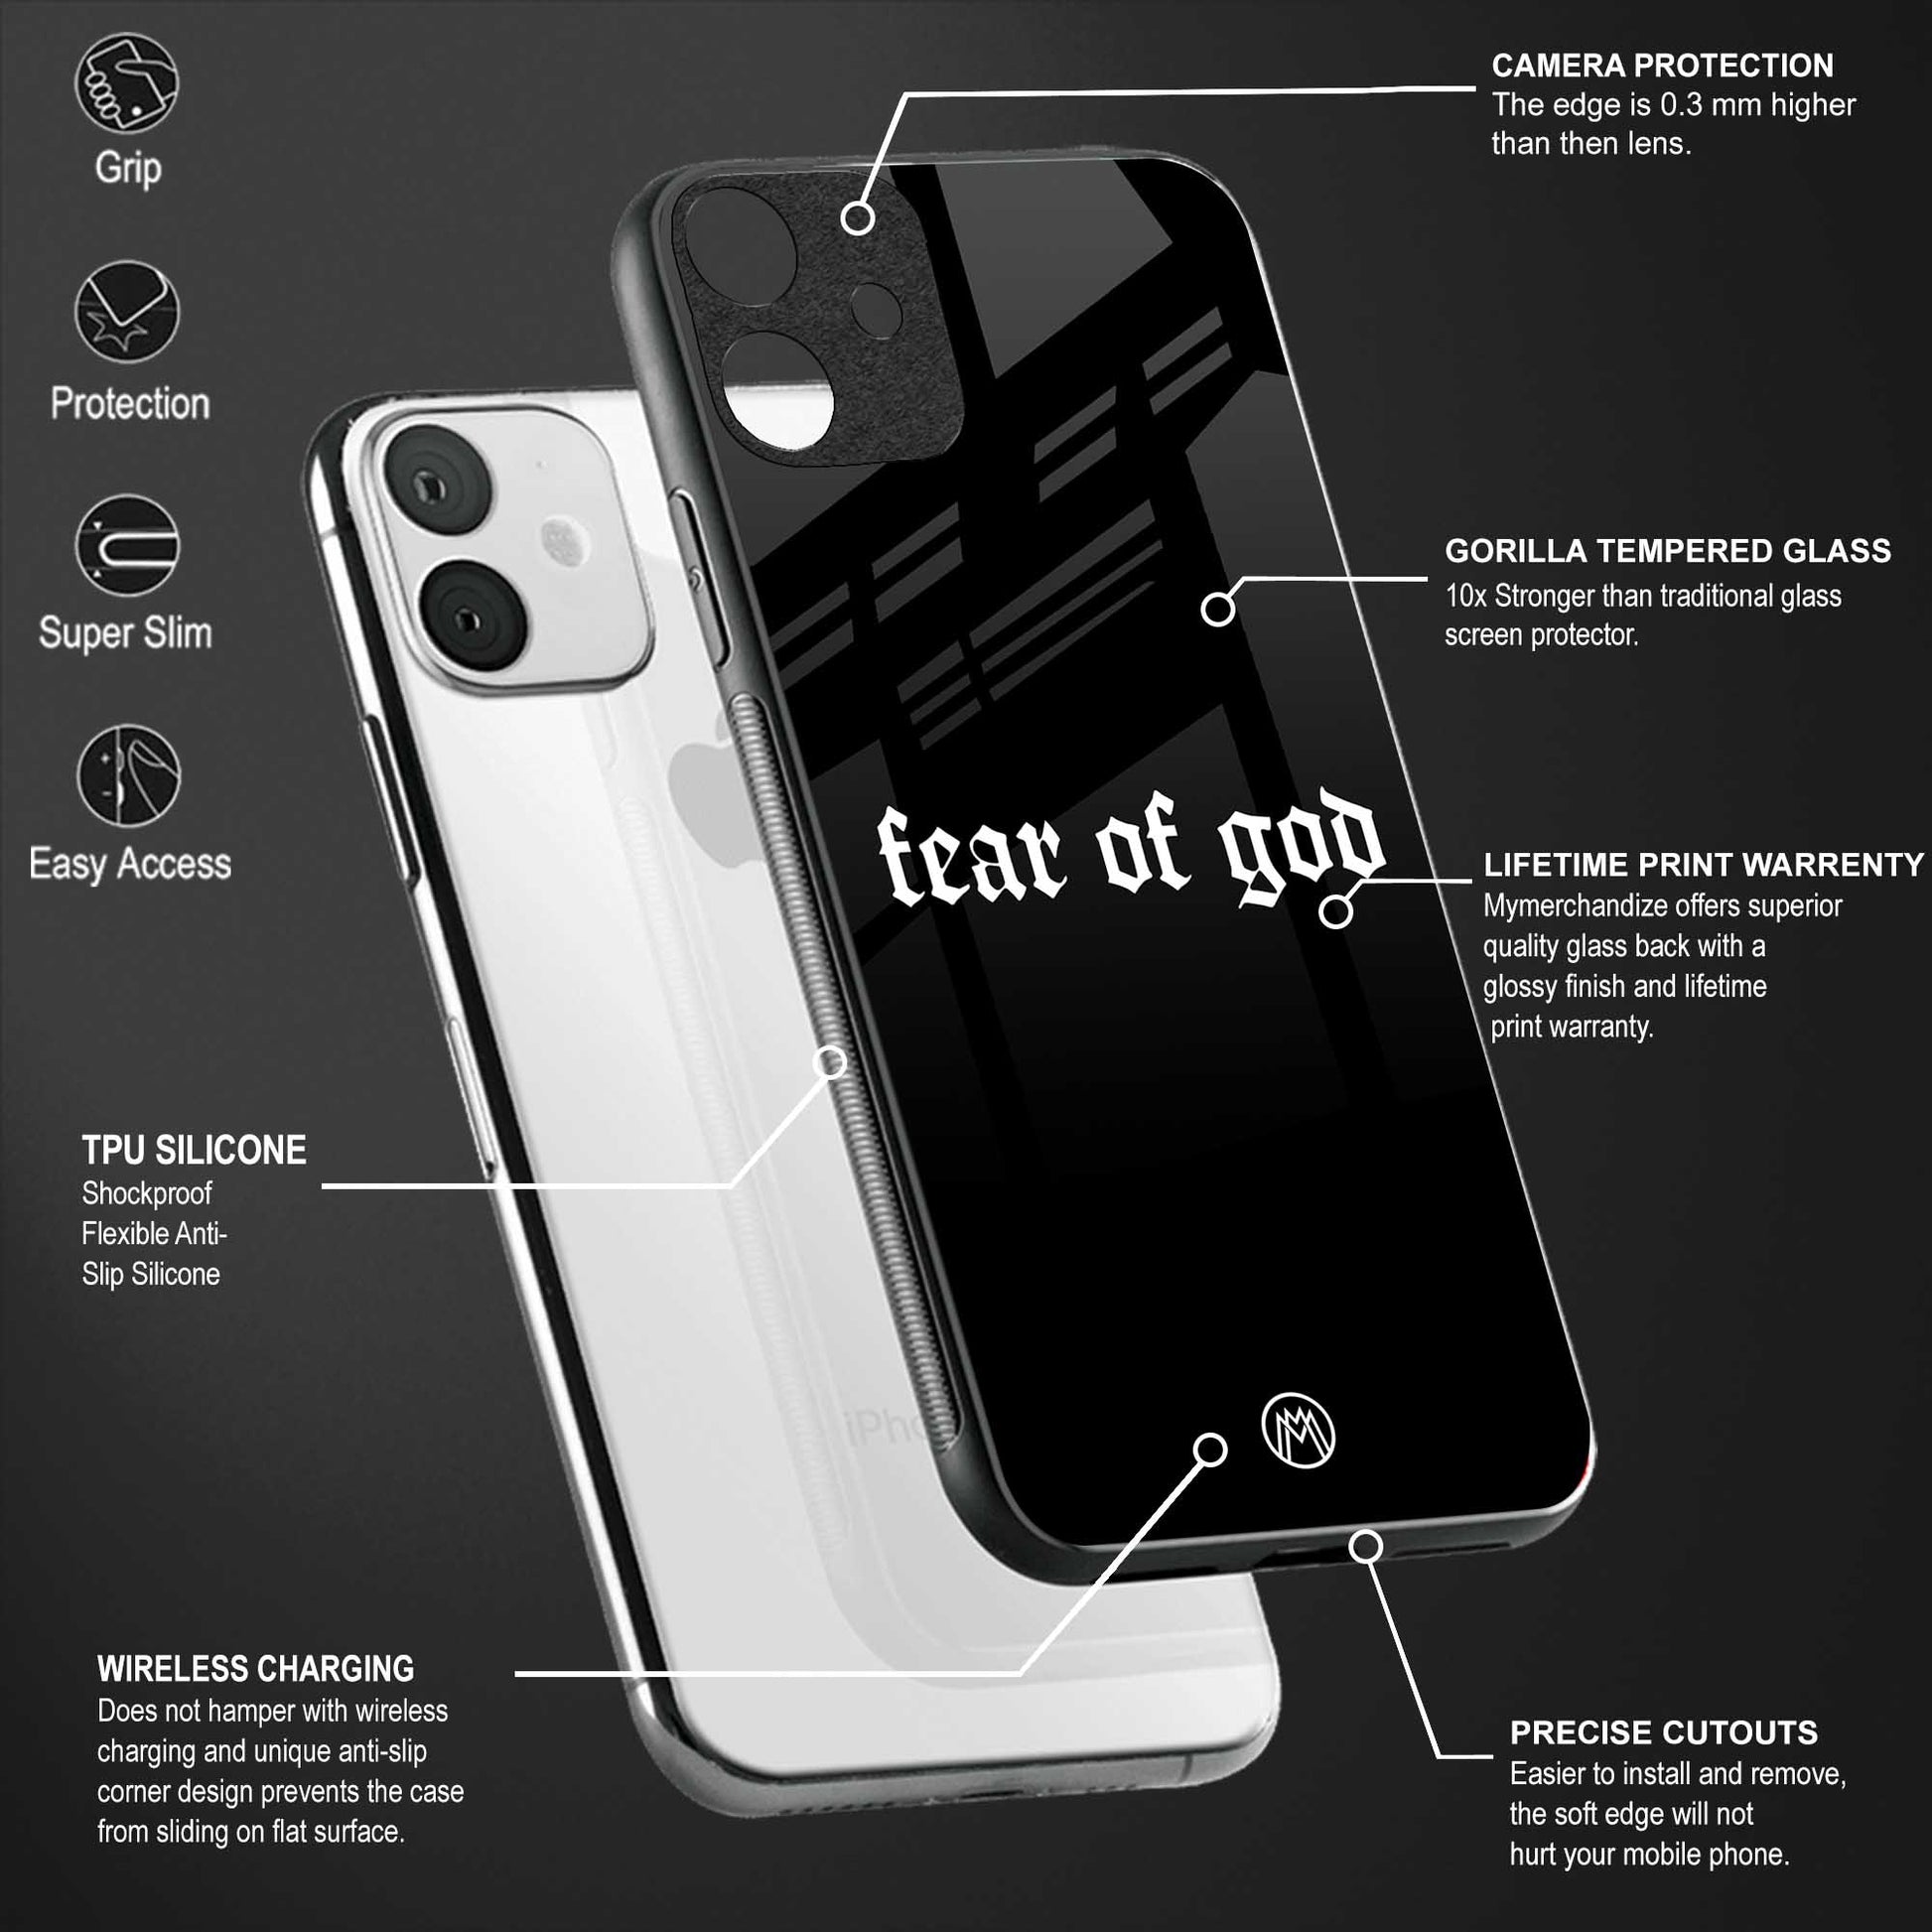 fear of god phone cover for samsung galaxy note 8